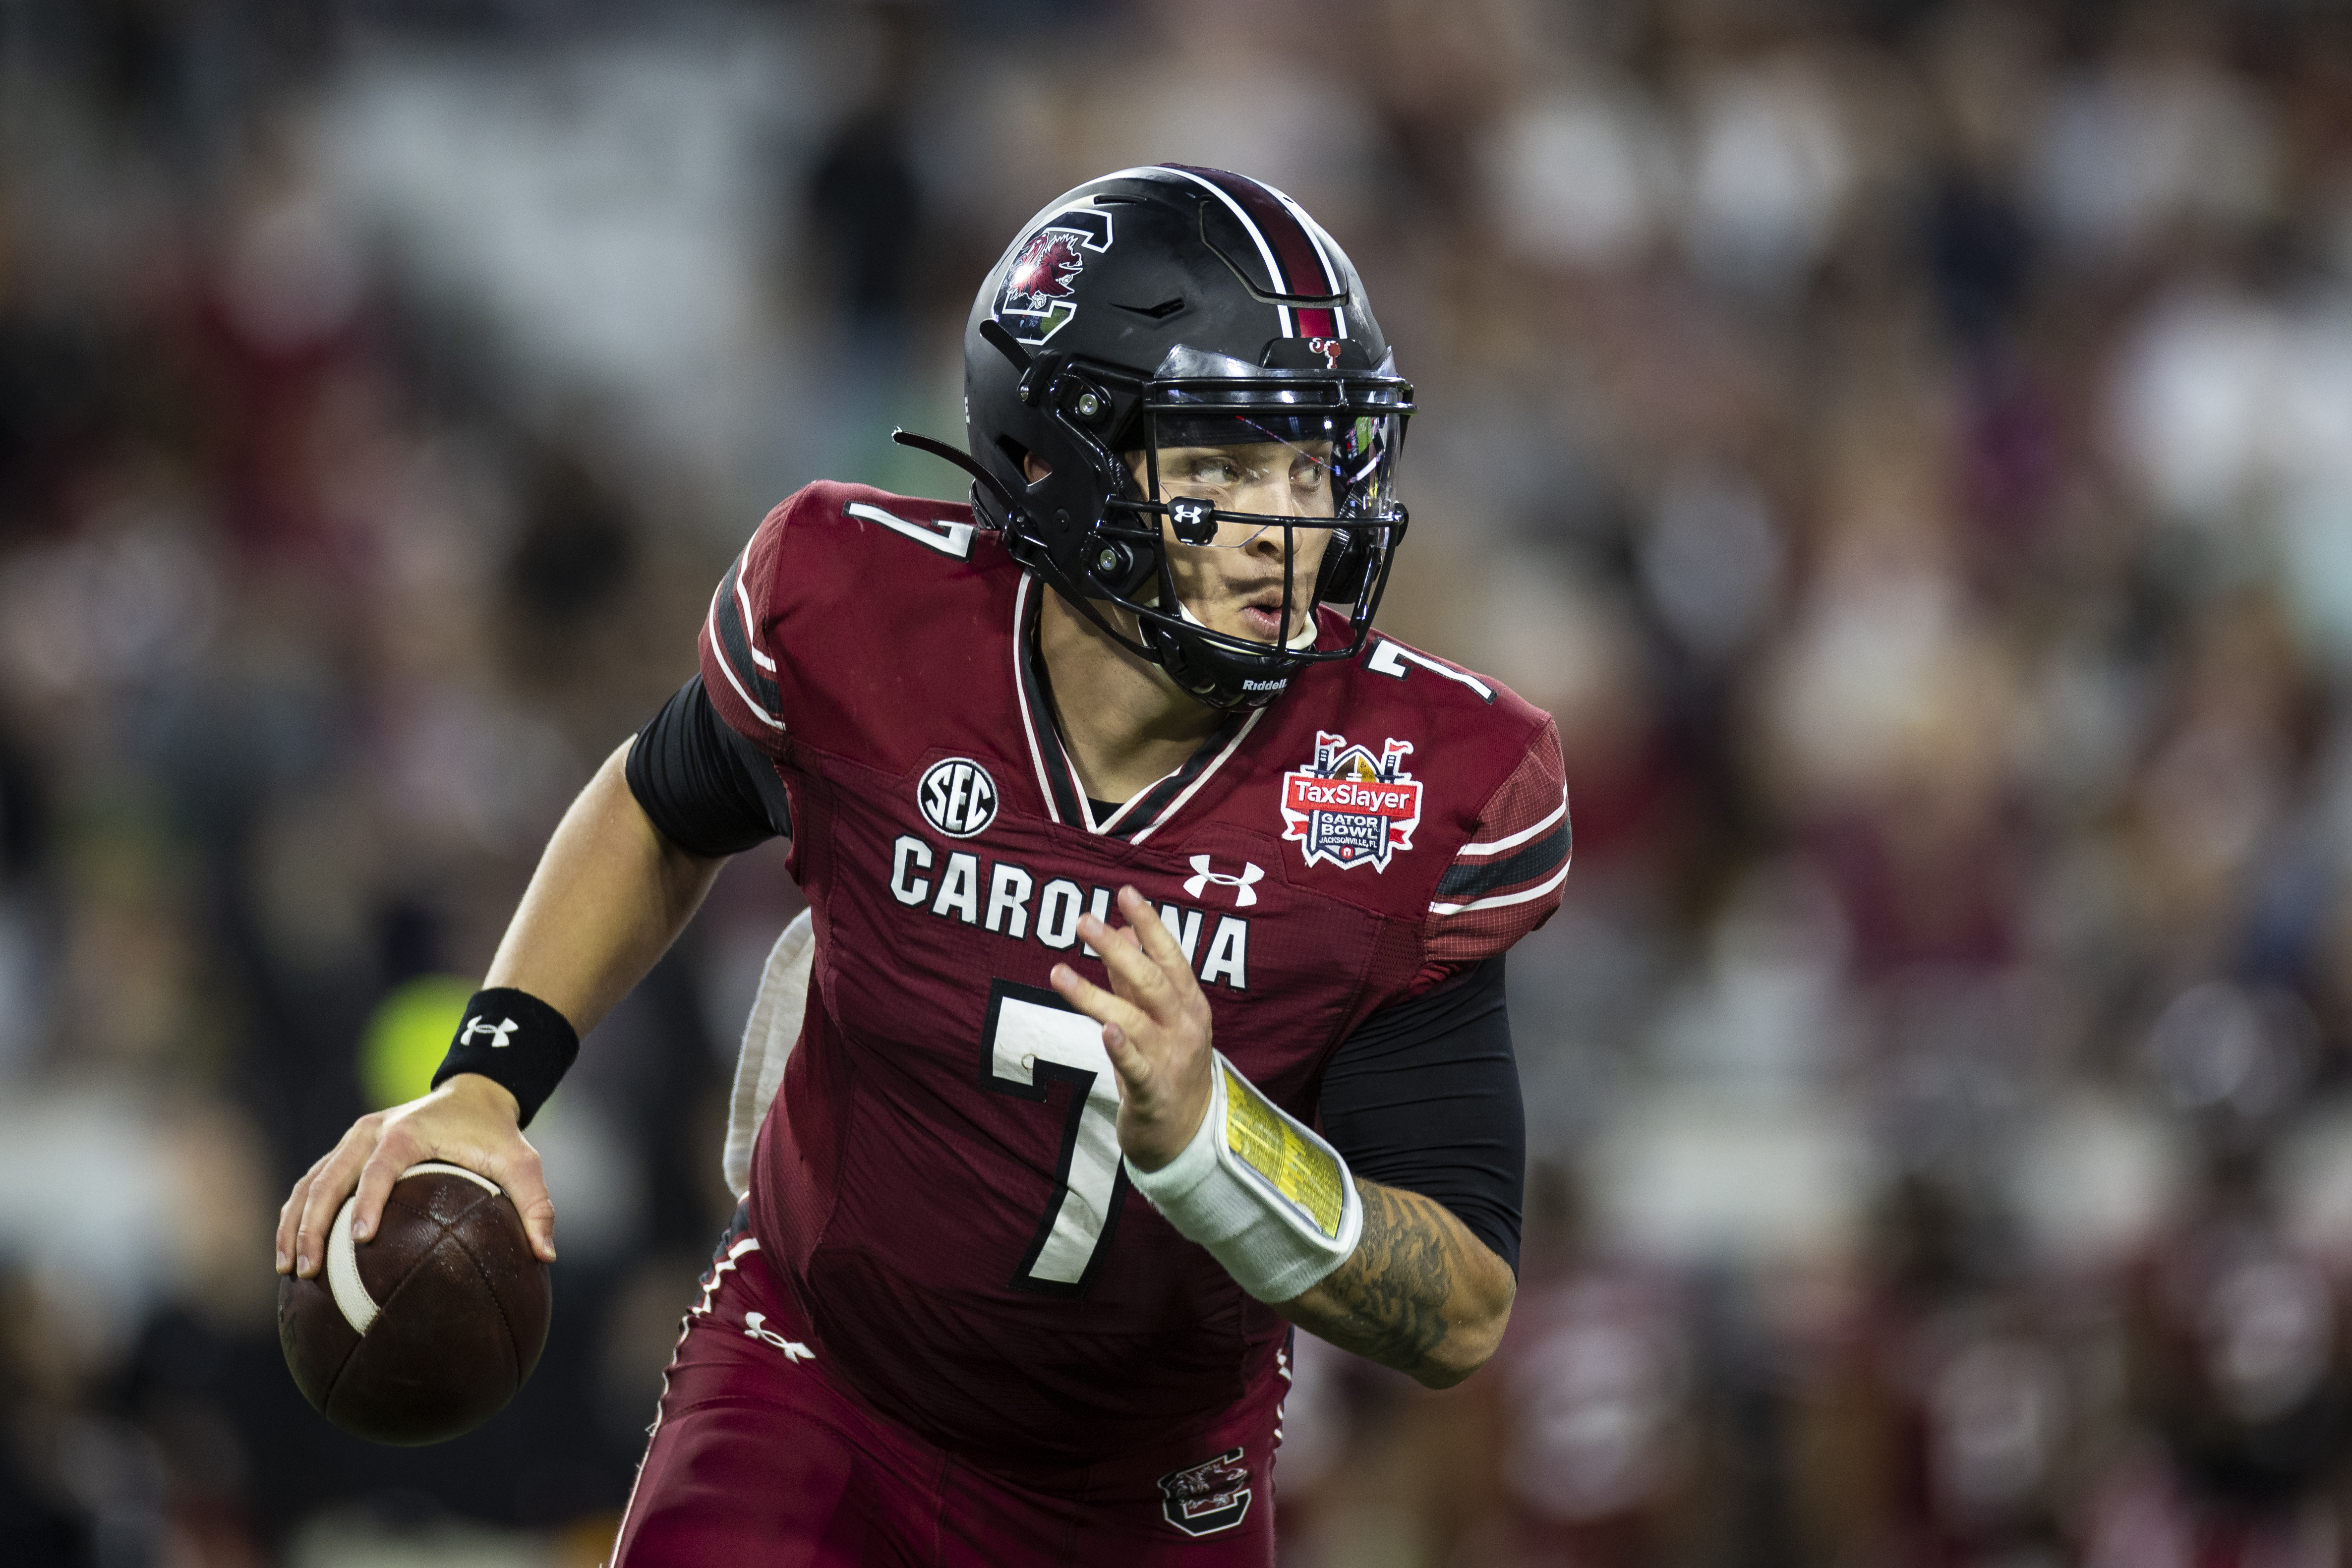 JACKSONVILLE, FLORIDA - DECEMBER 30: Spencer Rattler #7 of the South Carolina Gamecocks looks to pass against the Notre Dame Fighting Irish during the second half of the TaxSlayer Gator Bowl at TIAA Bank Field on December 30, 2022 in Jacksonville, Florida. 